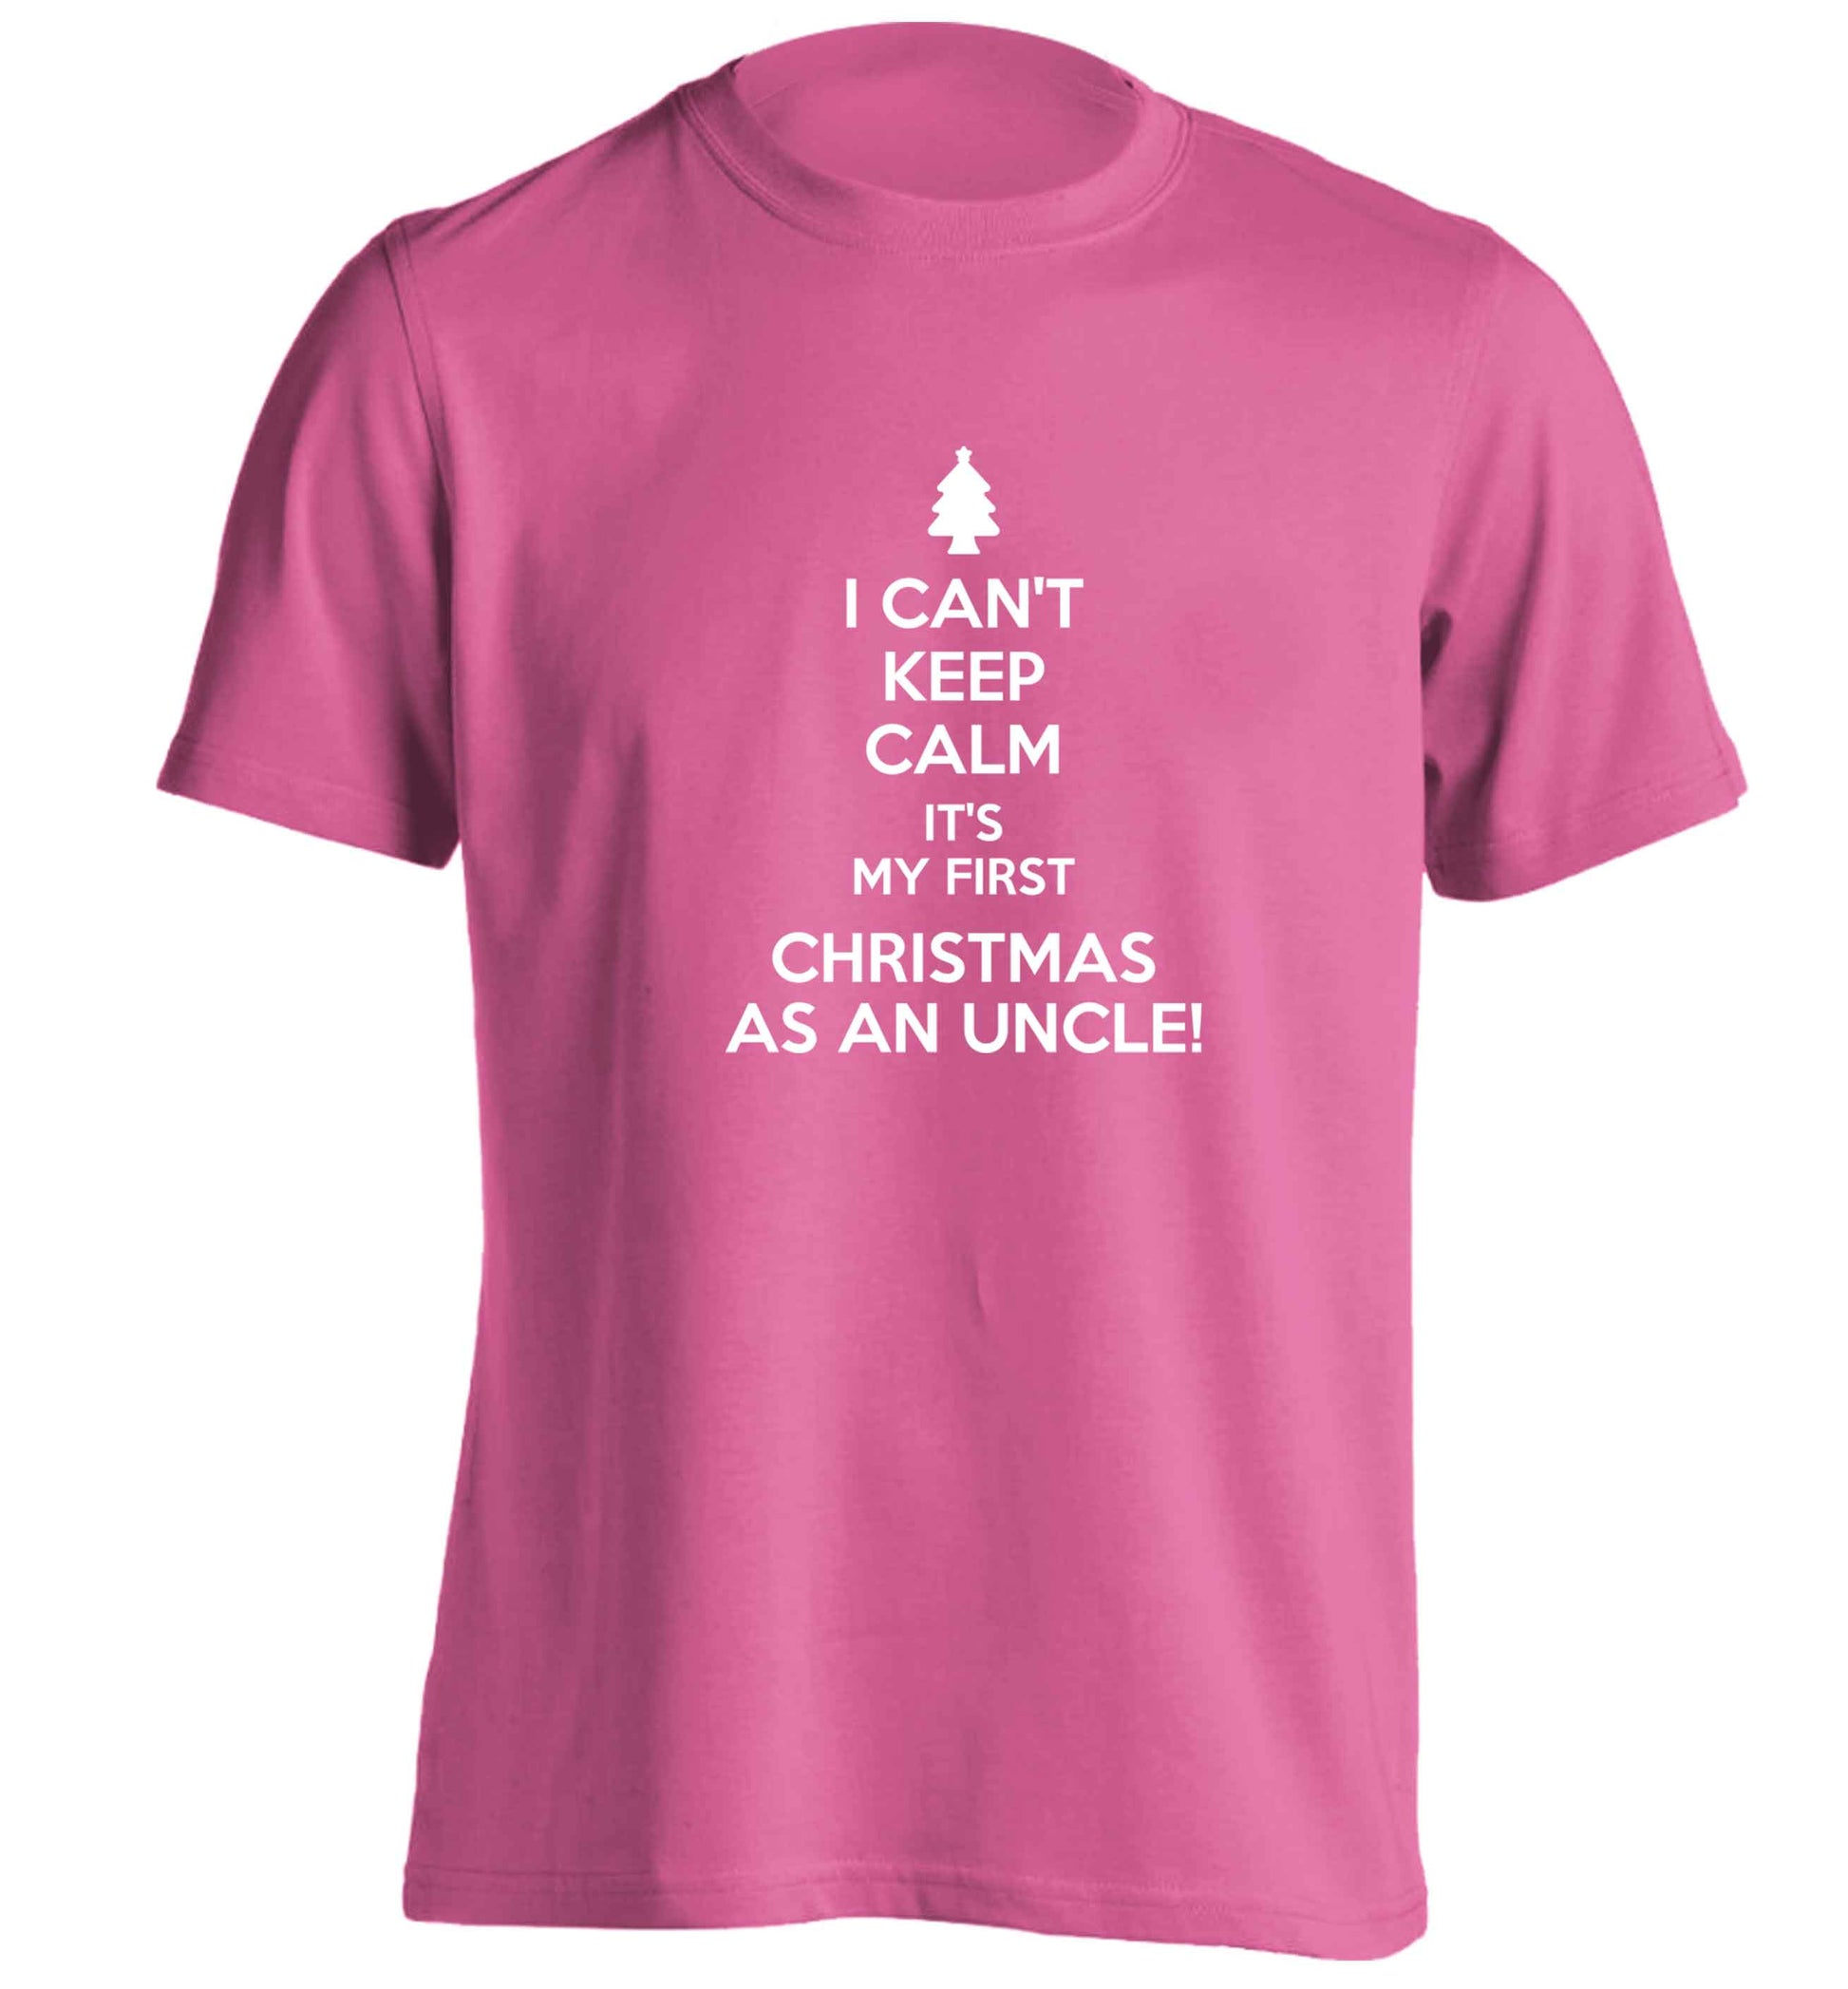 I can't keep calm it's my first Christmas as an uncle! adults unisex pink Tshirt 2XL